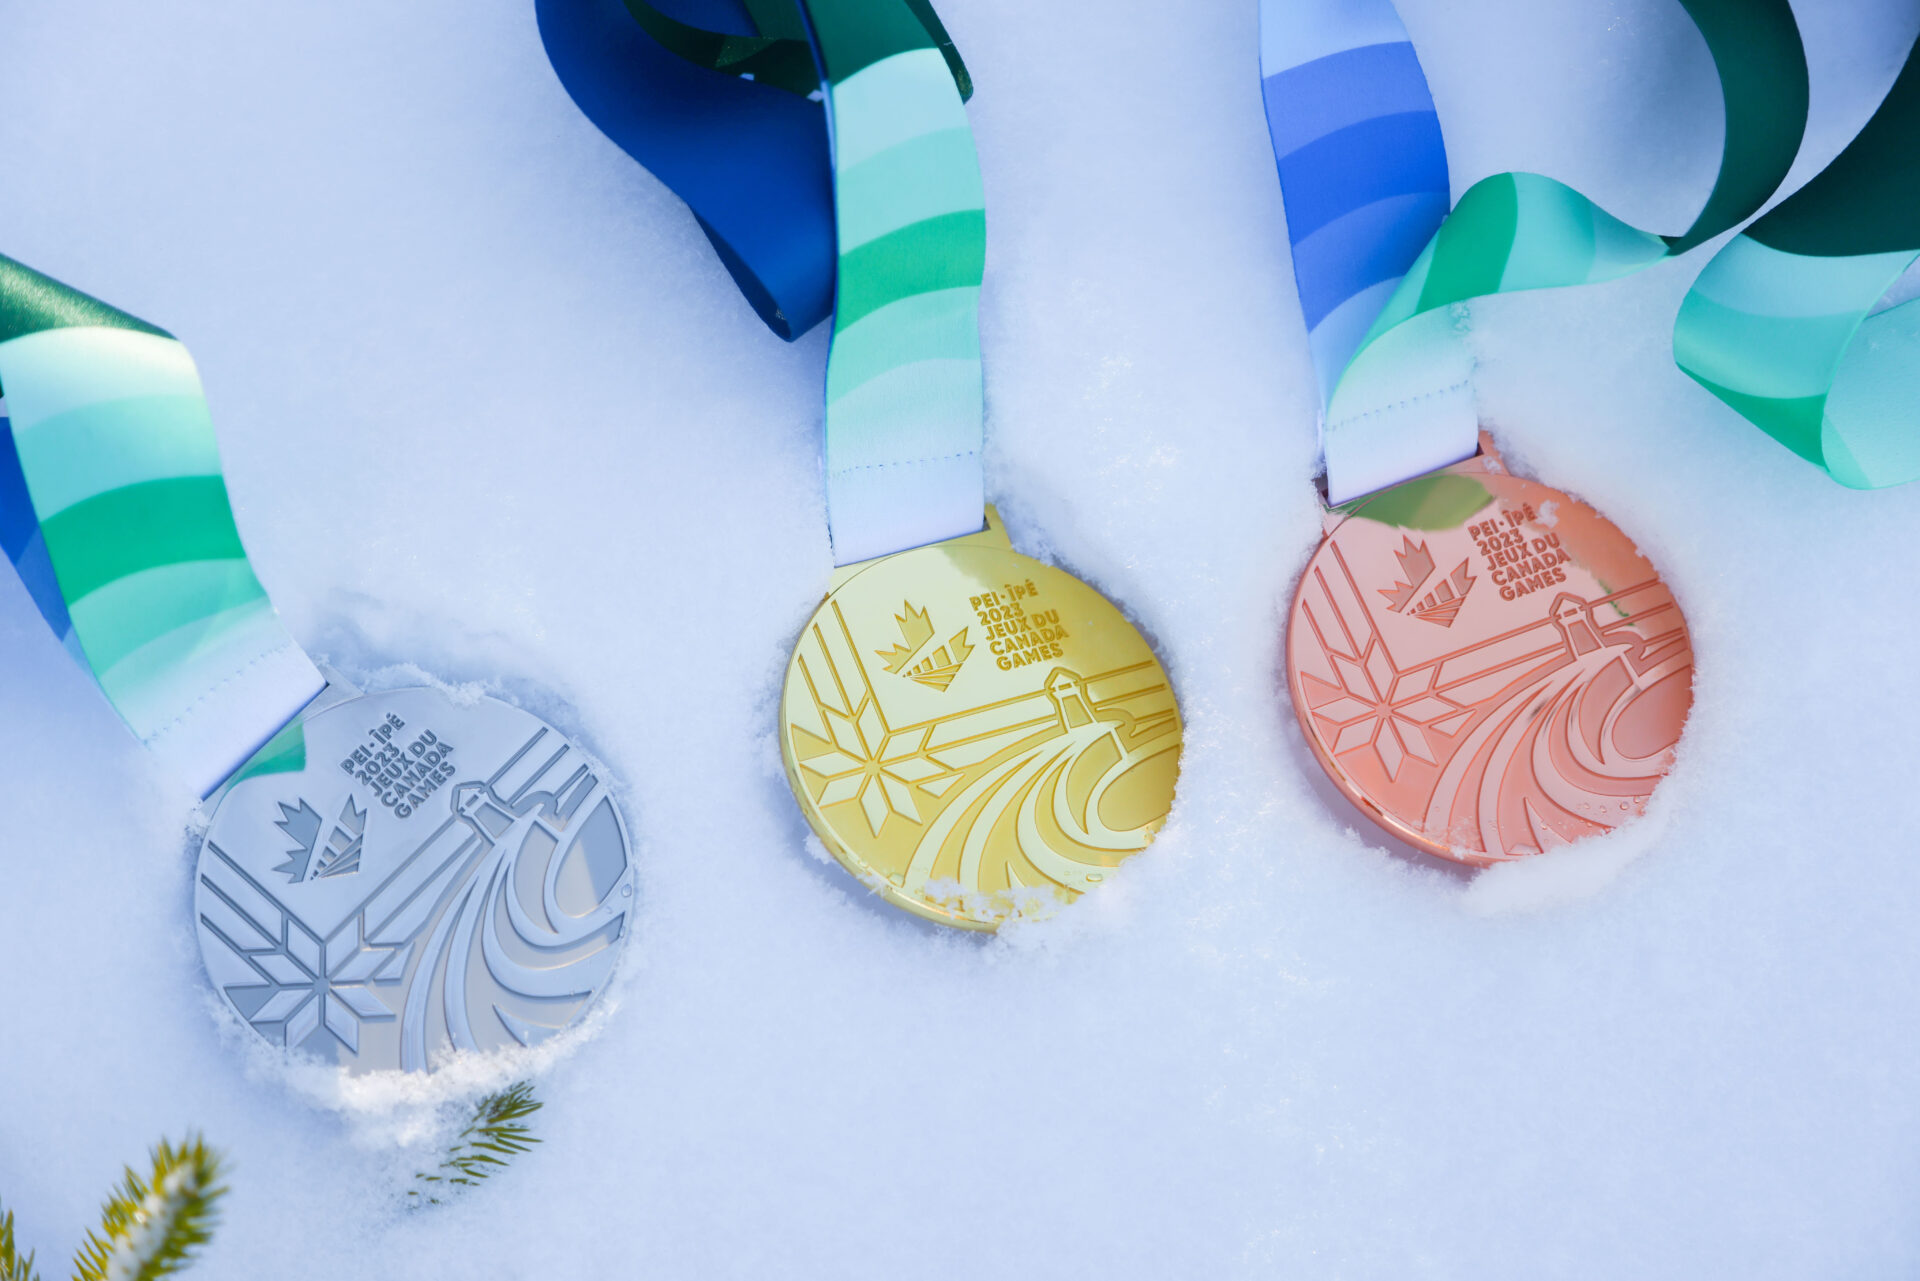 Medal Design Unveiled for the PEI 2023 Canada Winter Games